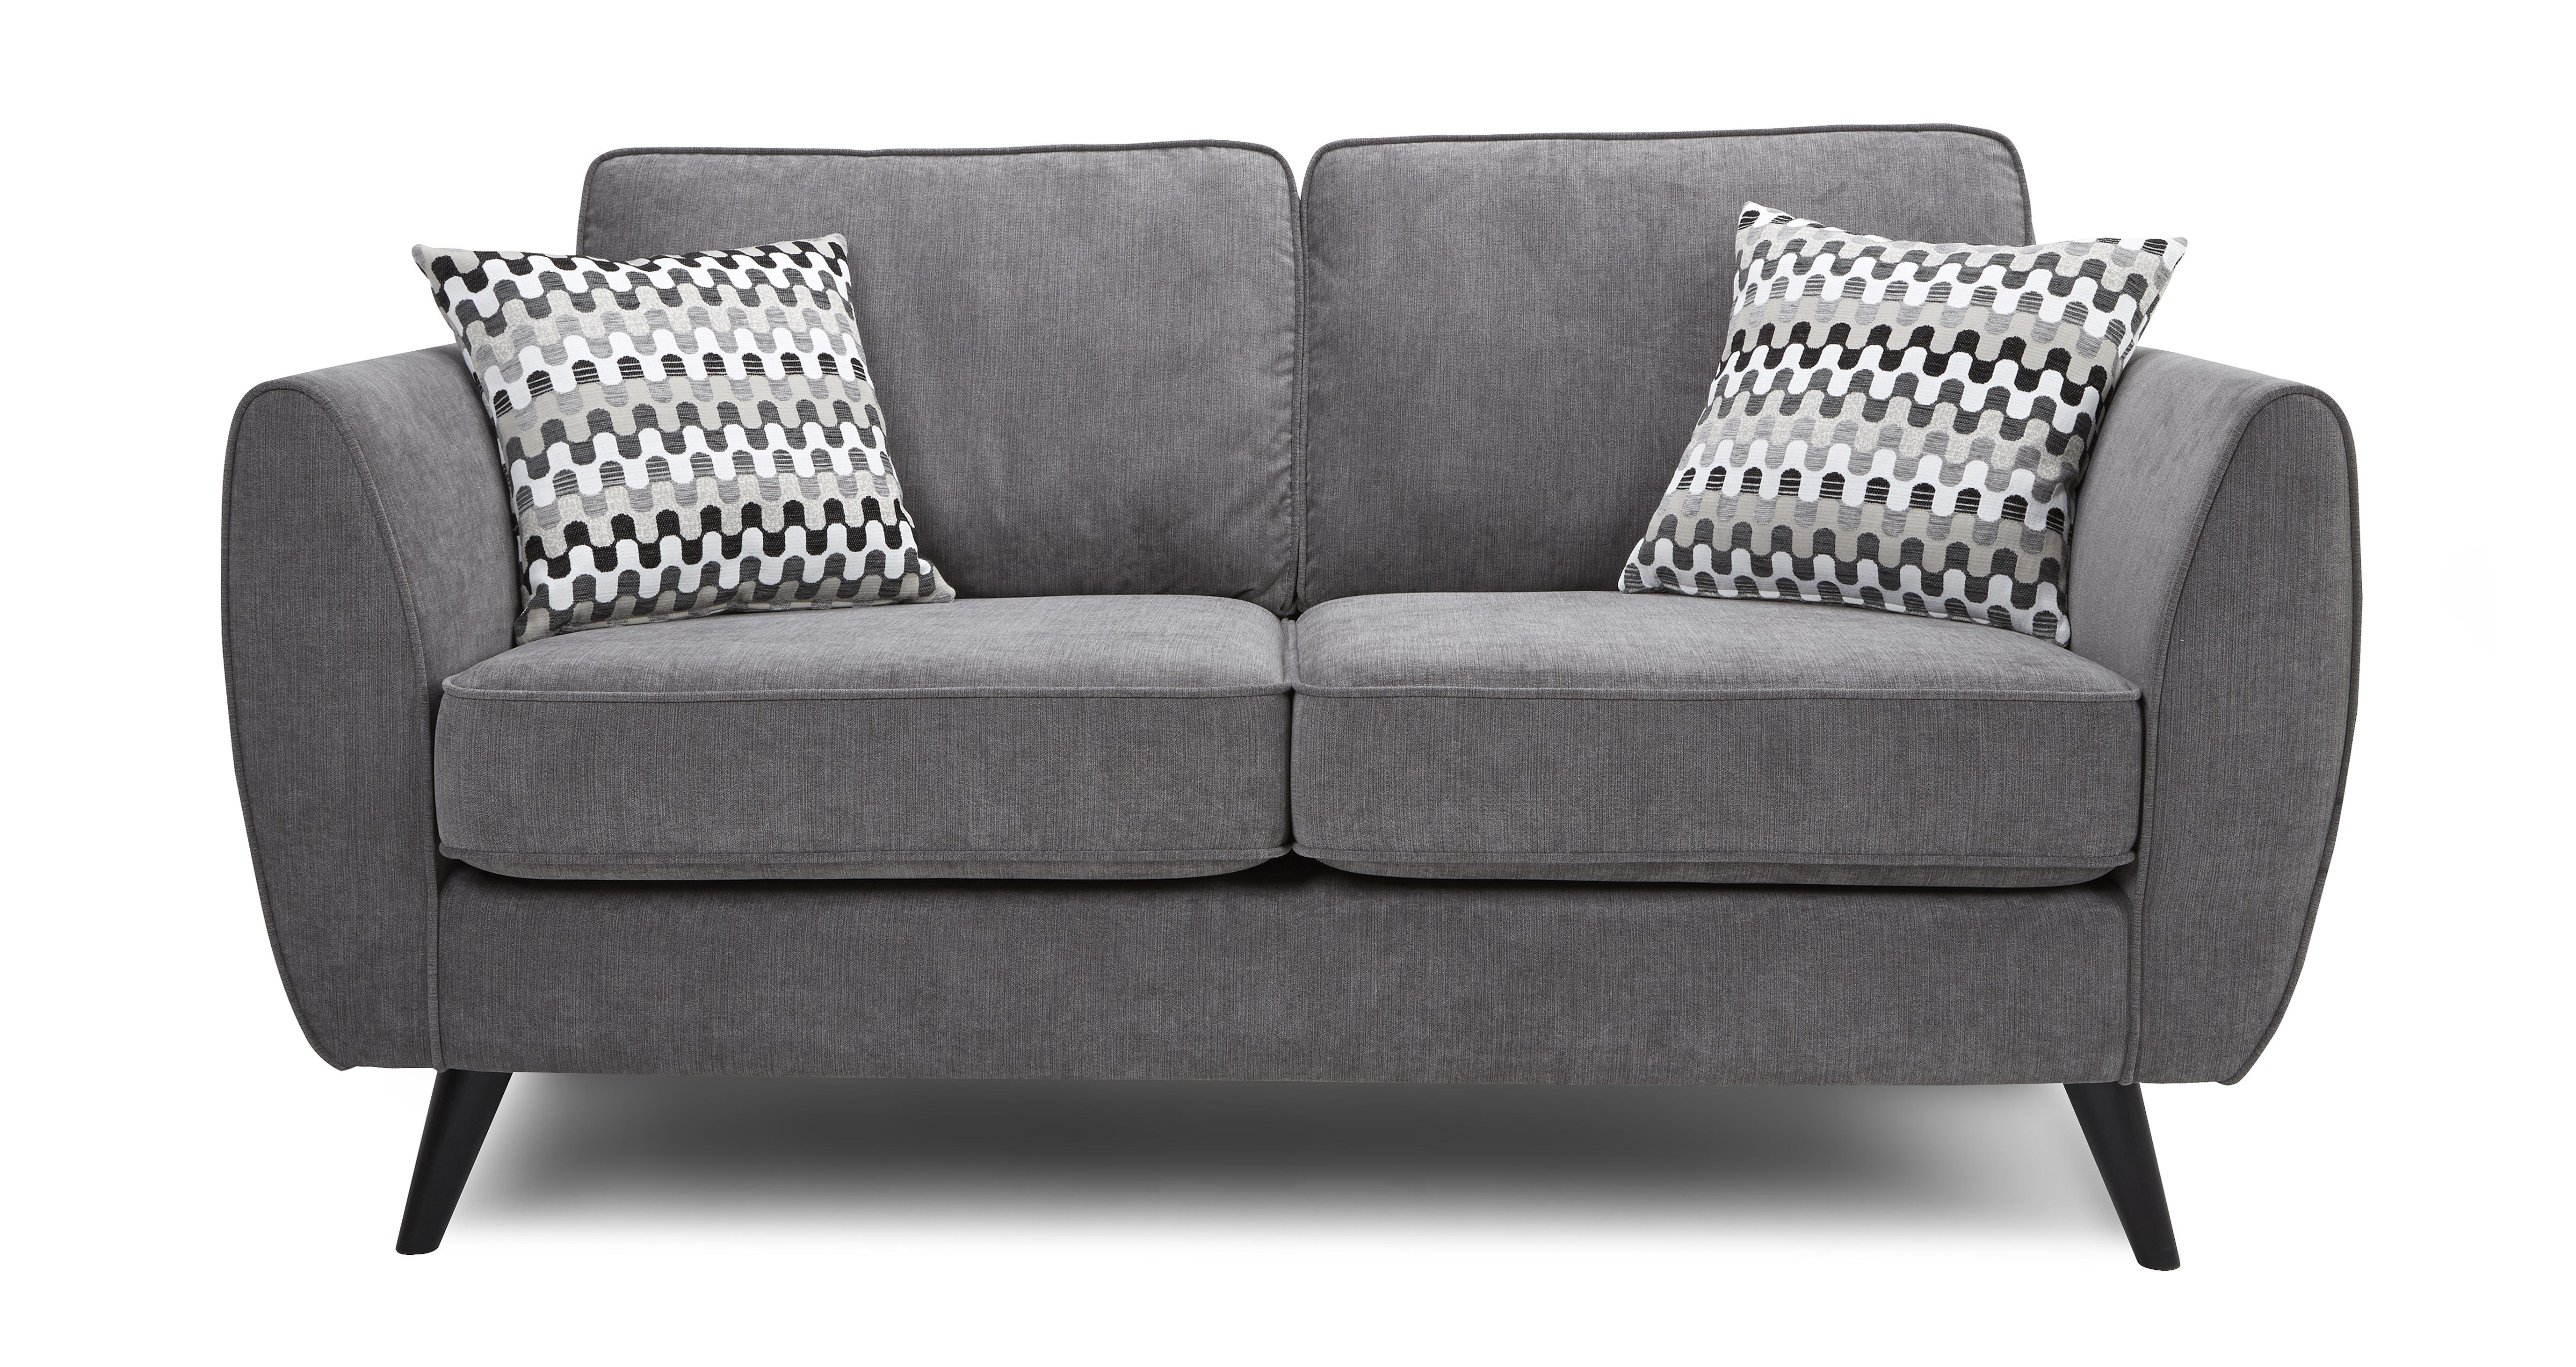 Spend quality time with your better half on a two seater sofa